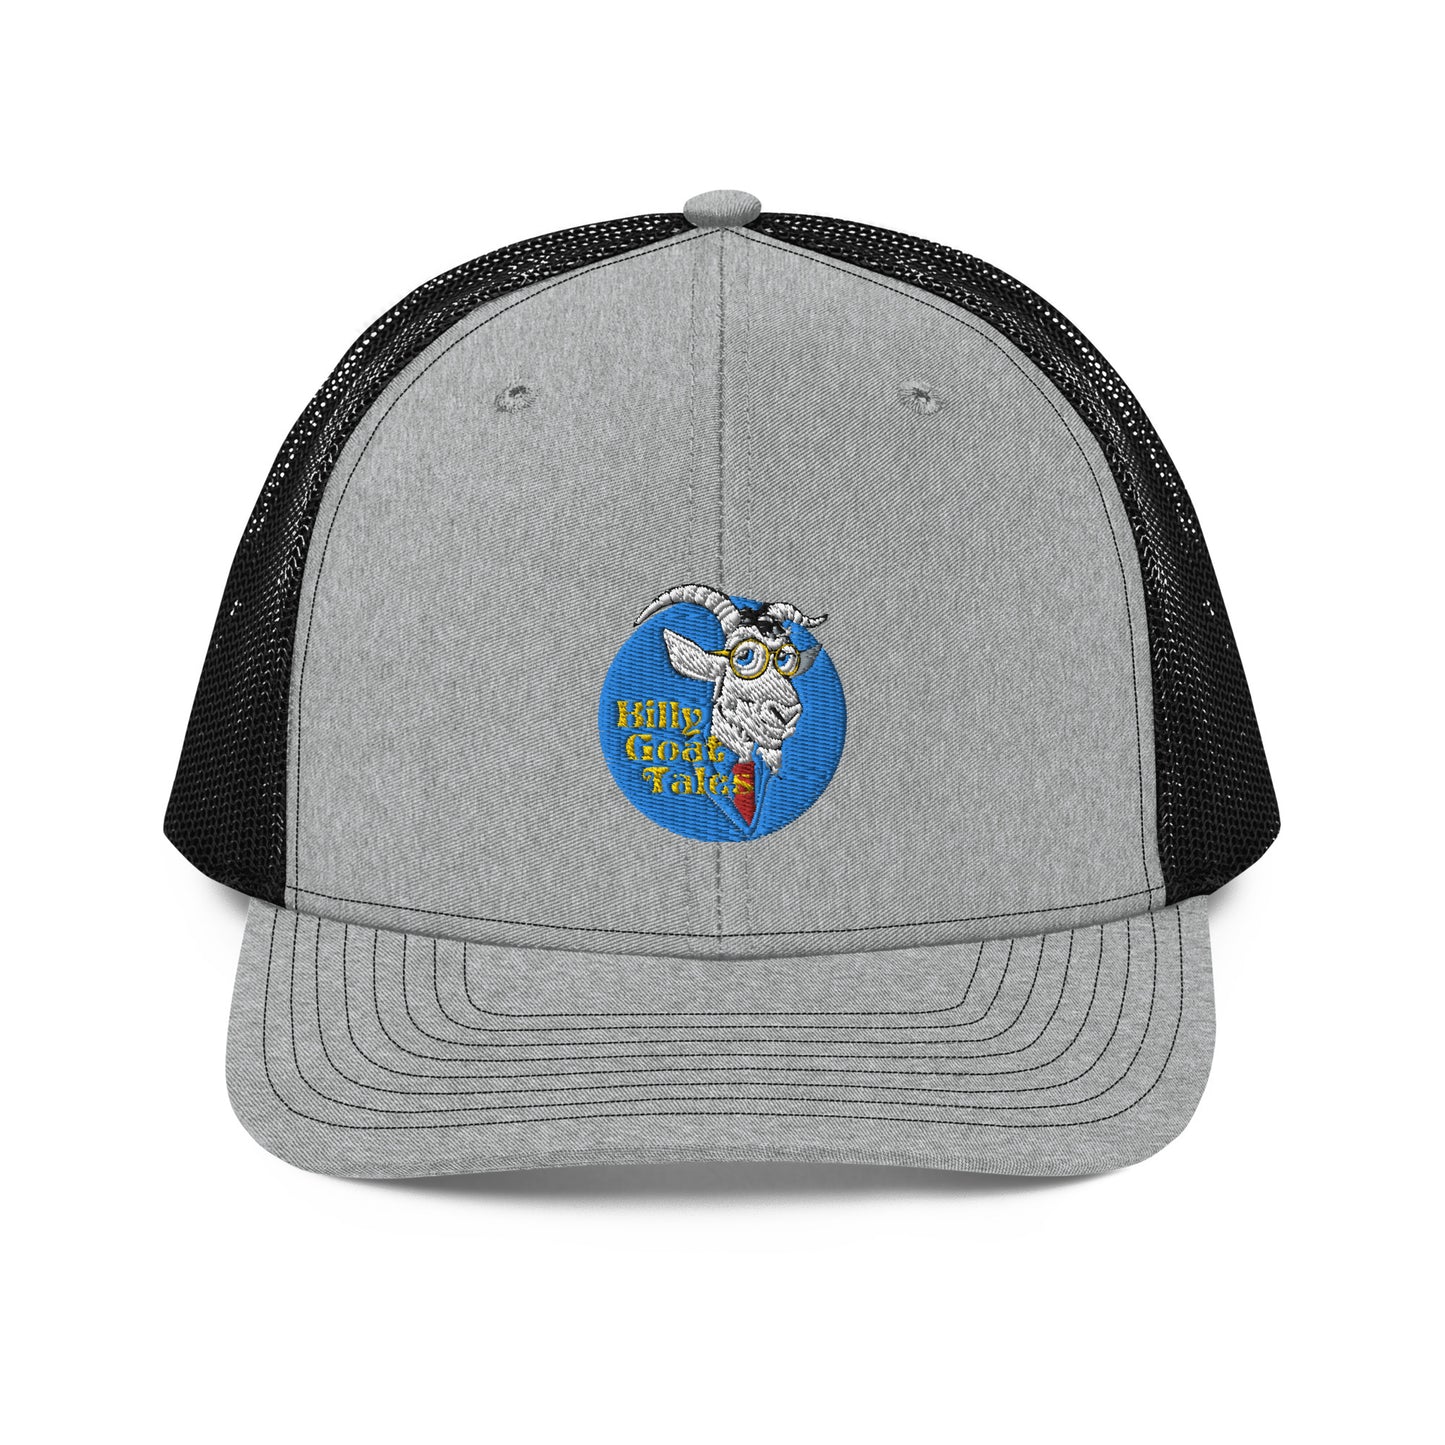 Billy Goat Tales Embroidered Richardson Trucker Cap